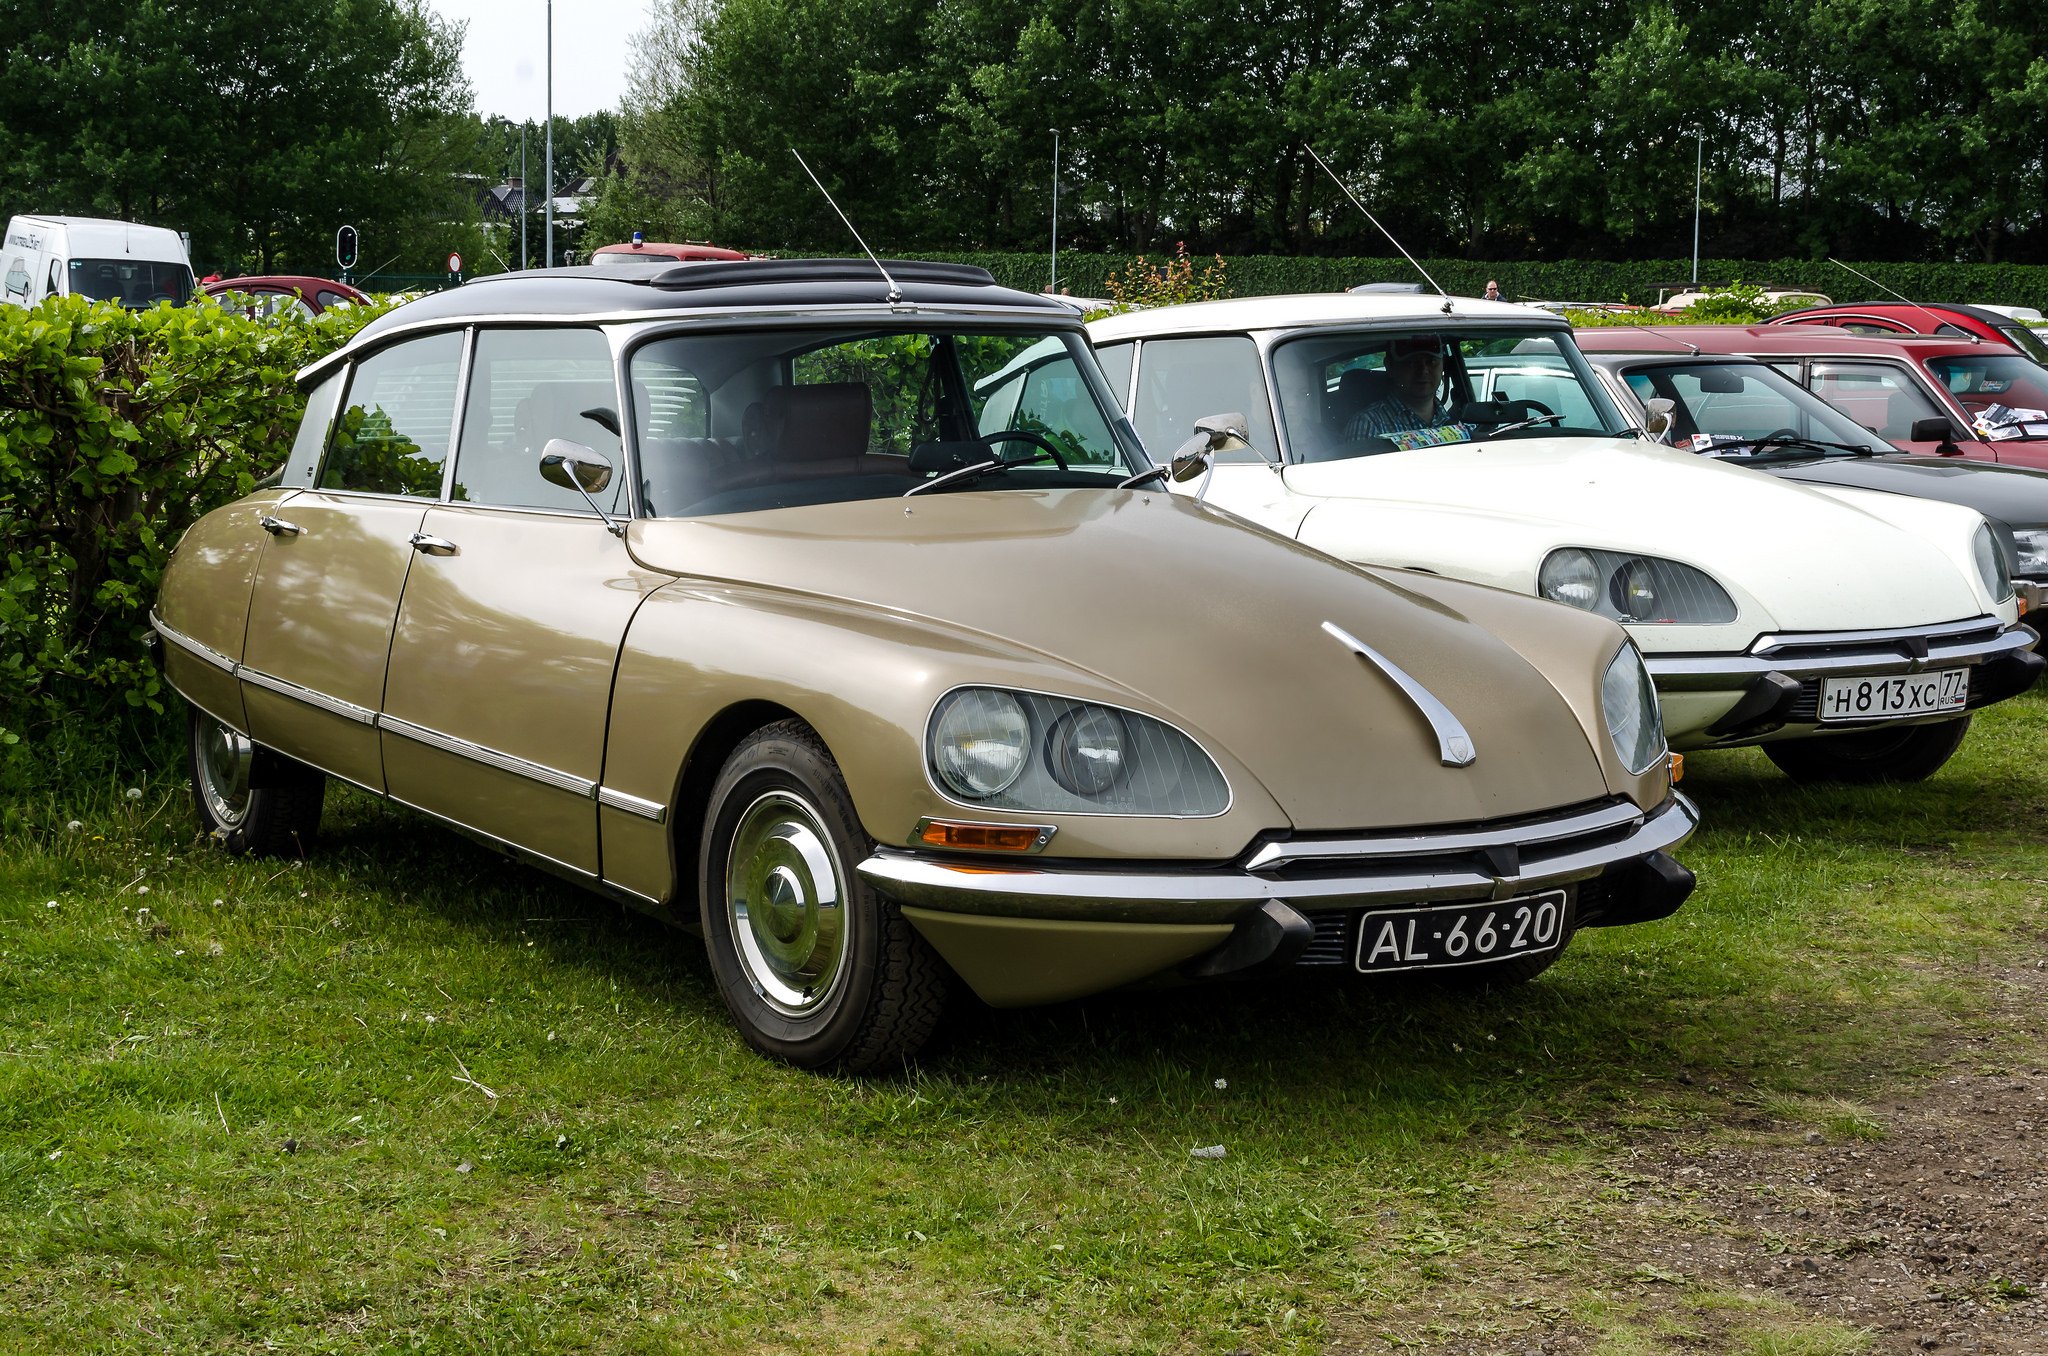 citroen, Ds, Classic, Cars, French Wallpapers HD / Desktop and Mobile